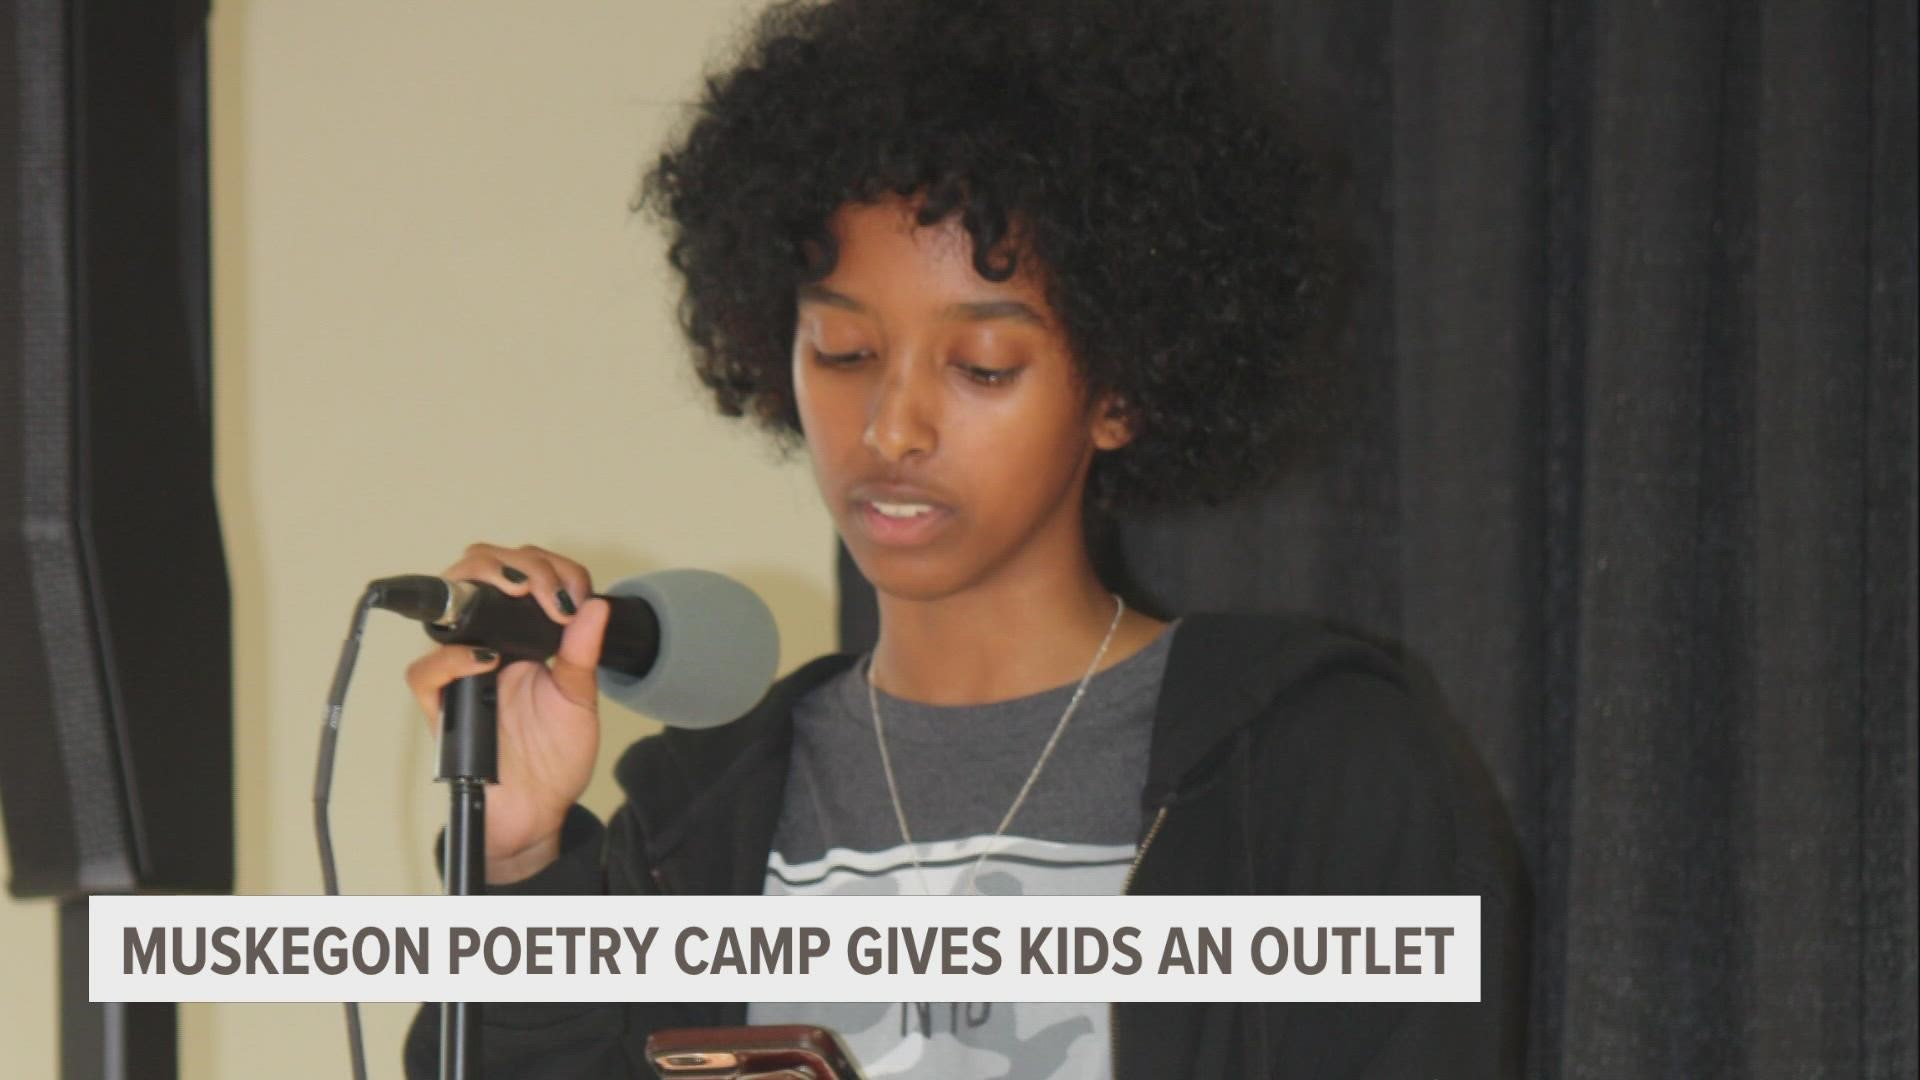 From July 11-15, The Diatribe Inc will be hosting a poetry camp with the goal of teaching children a healthy outlet to express themselves.